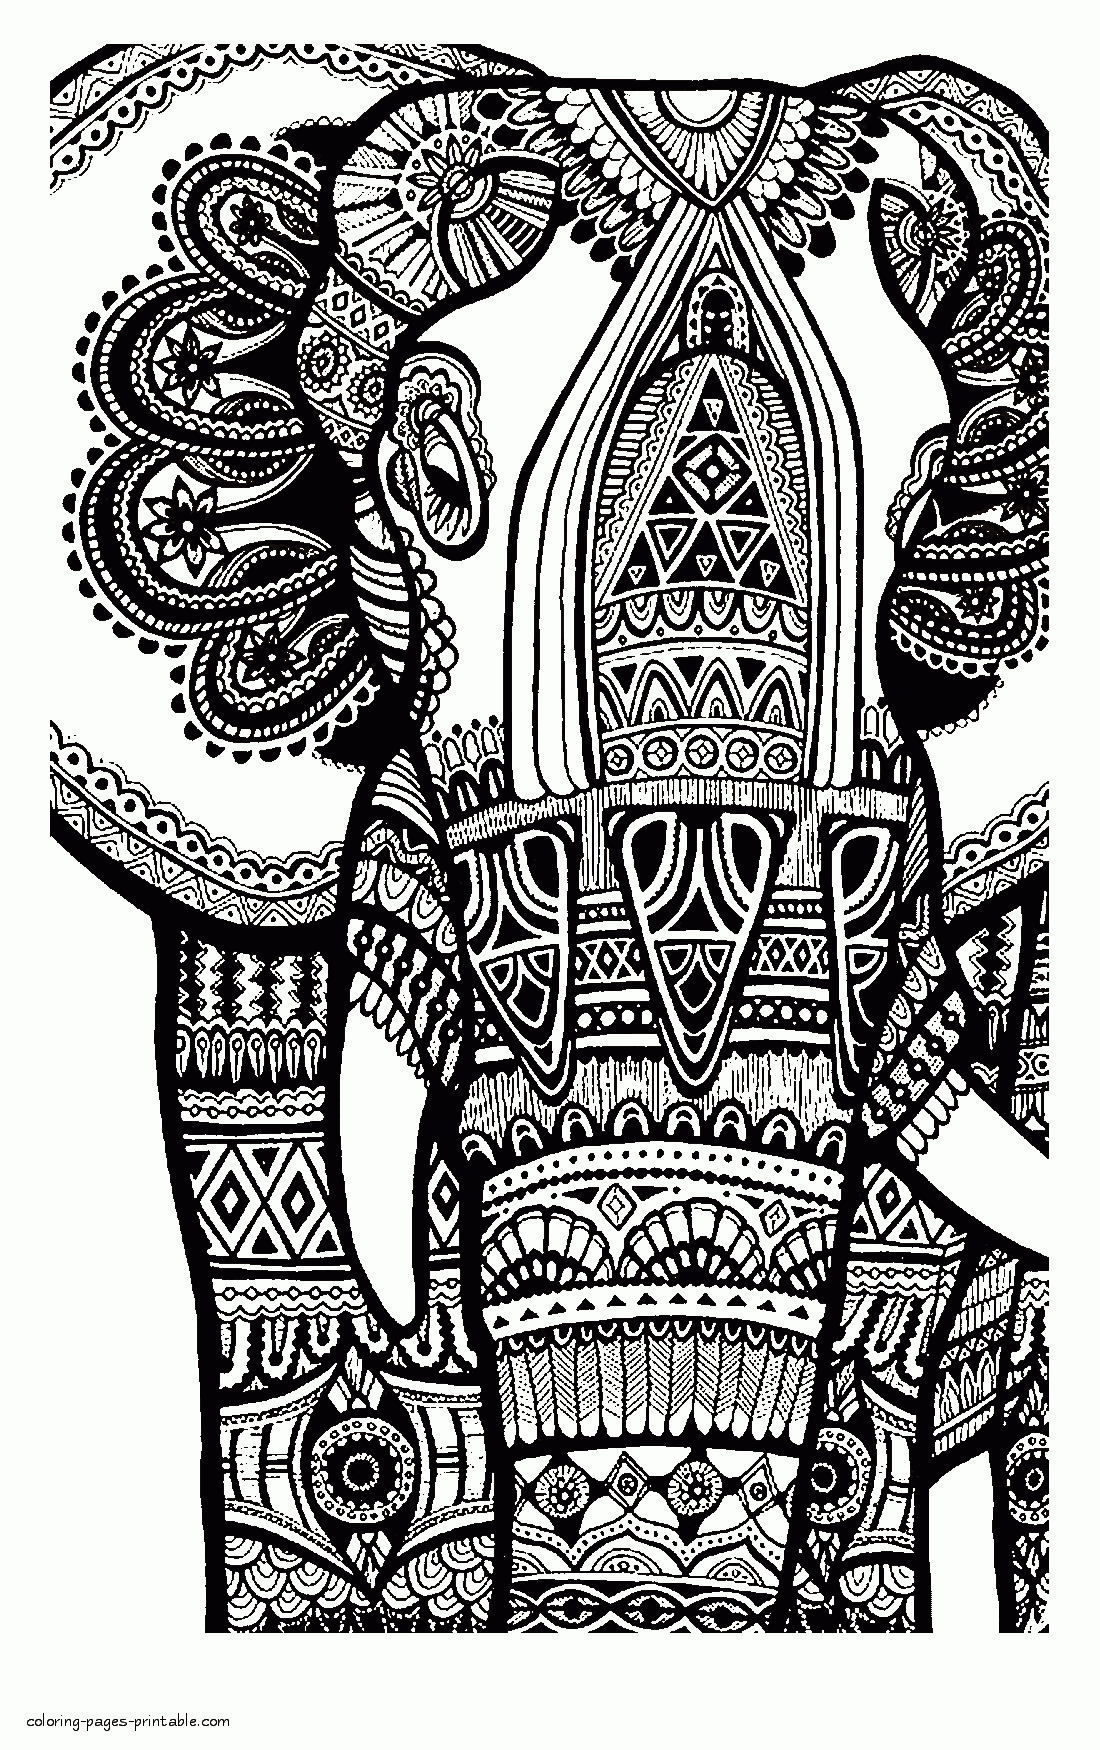 Download Elephant Coloring Book For Adults Coloring Pages Printable Com